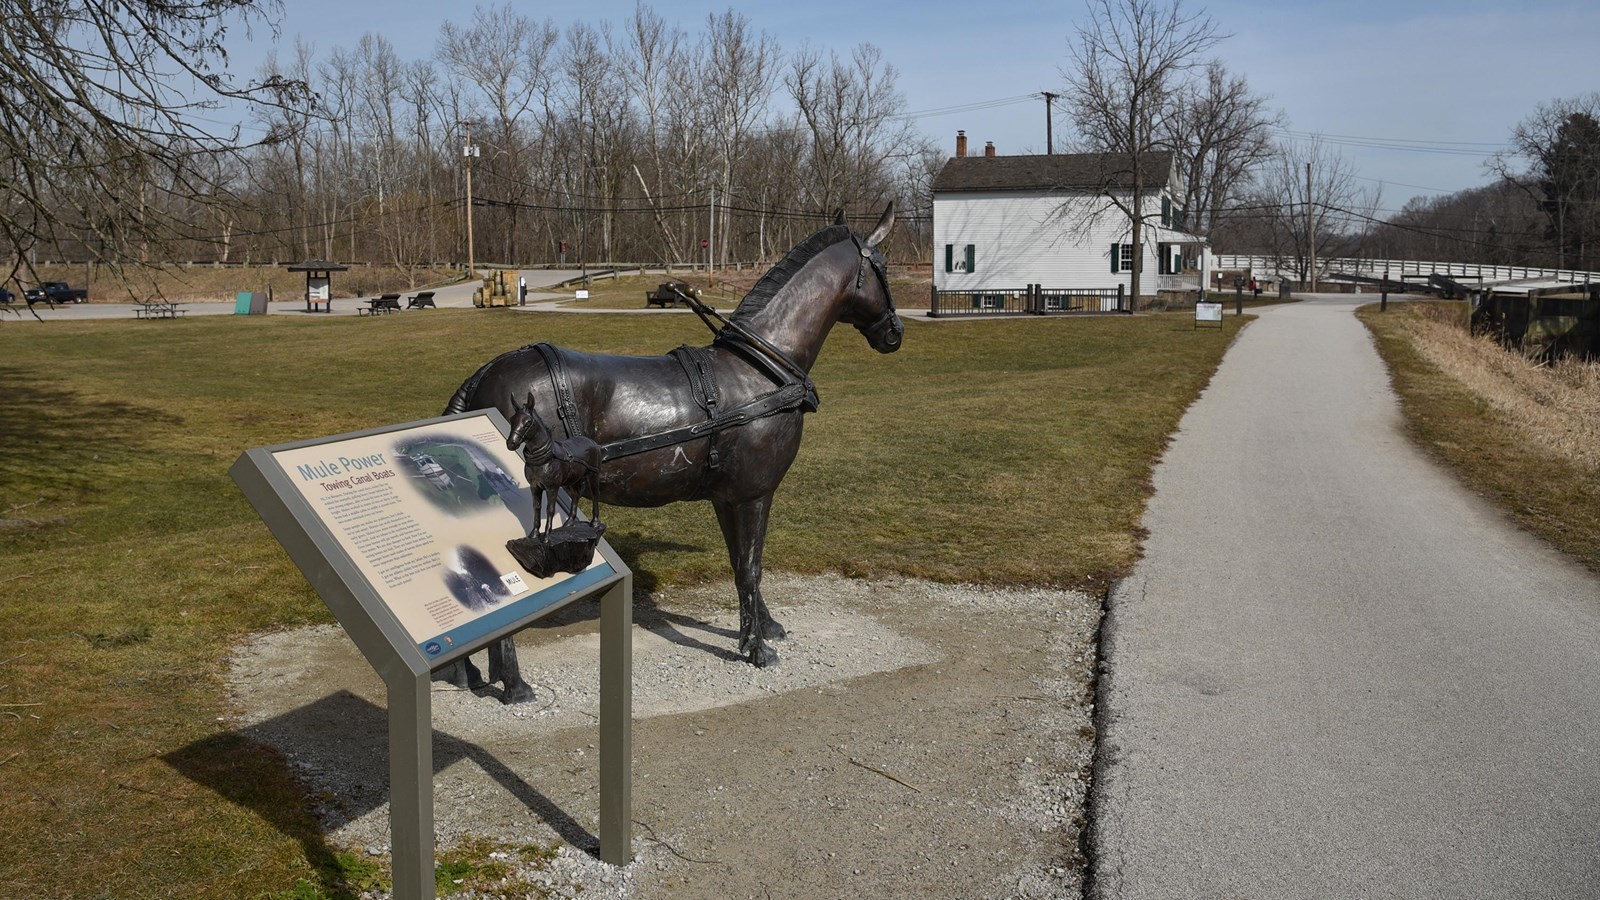 Life-sized mule statue and exhibit with tactile bronze mule; paved trail leads to a white building.